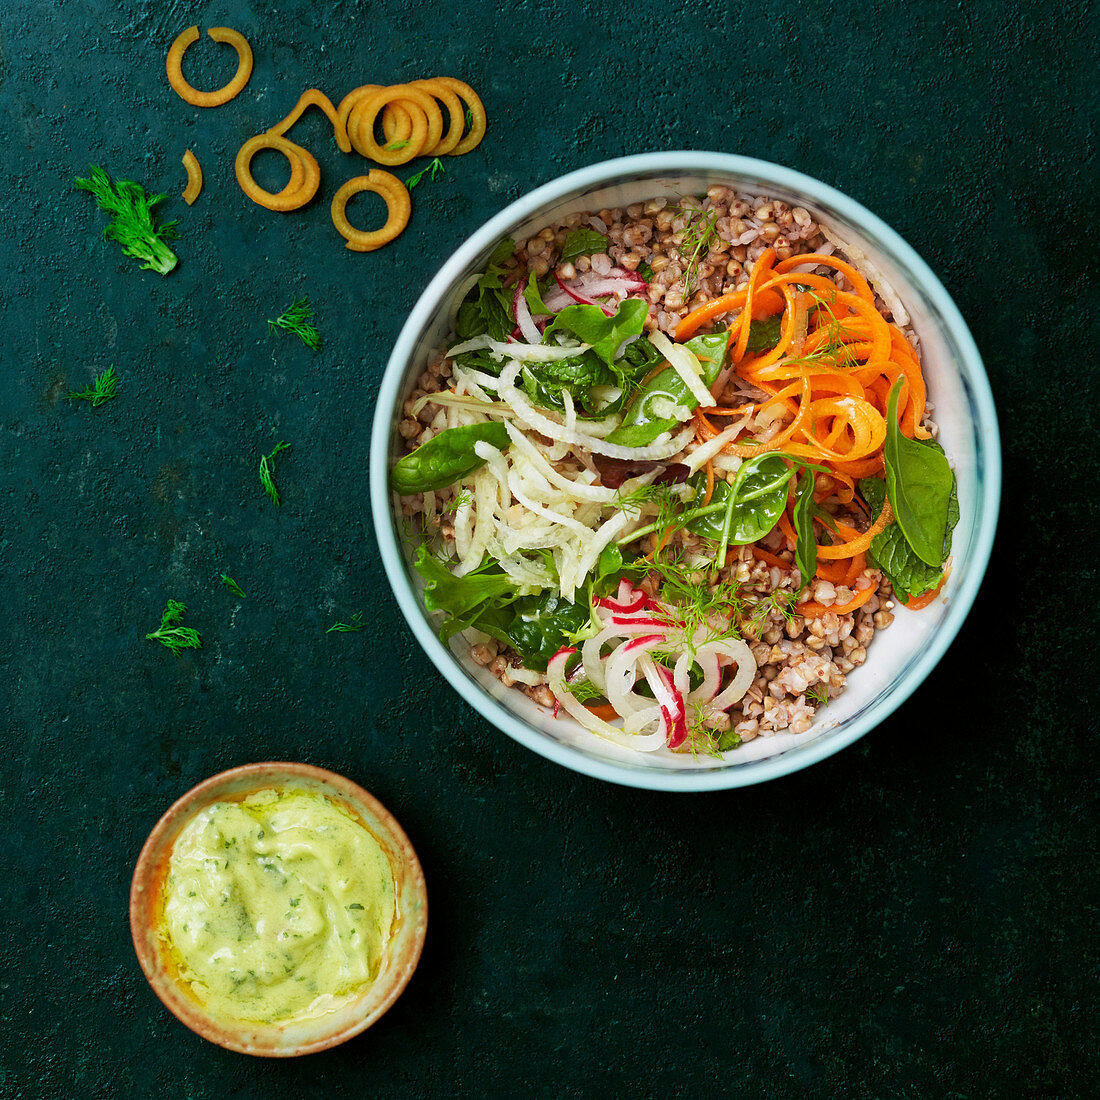 Buckwheat salad with fennel, carrot, spinach, radish and herb mayonnaise